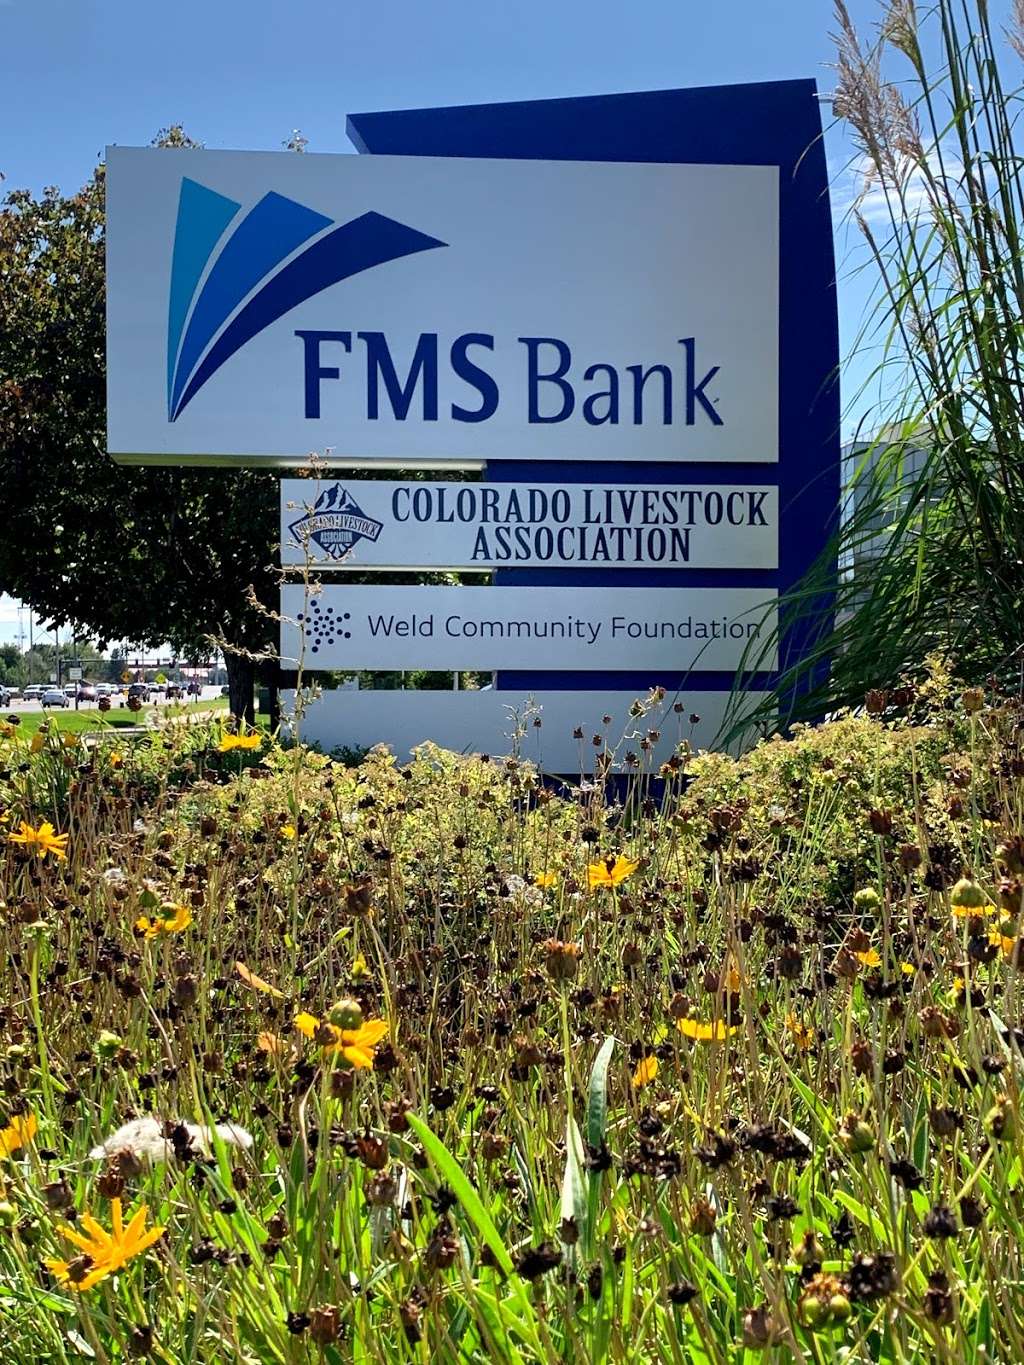 FMS Bank | 2425 35th Ave, Greeley, CO 80634, USA | Phone: (970) 673-4501